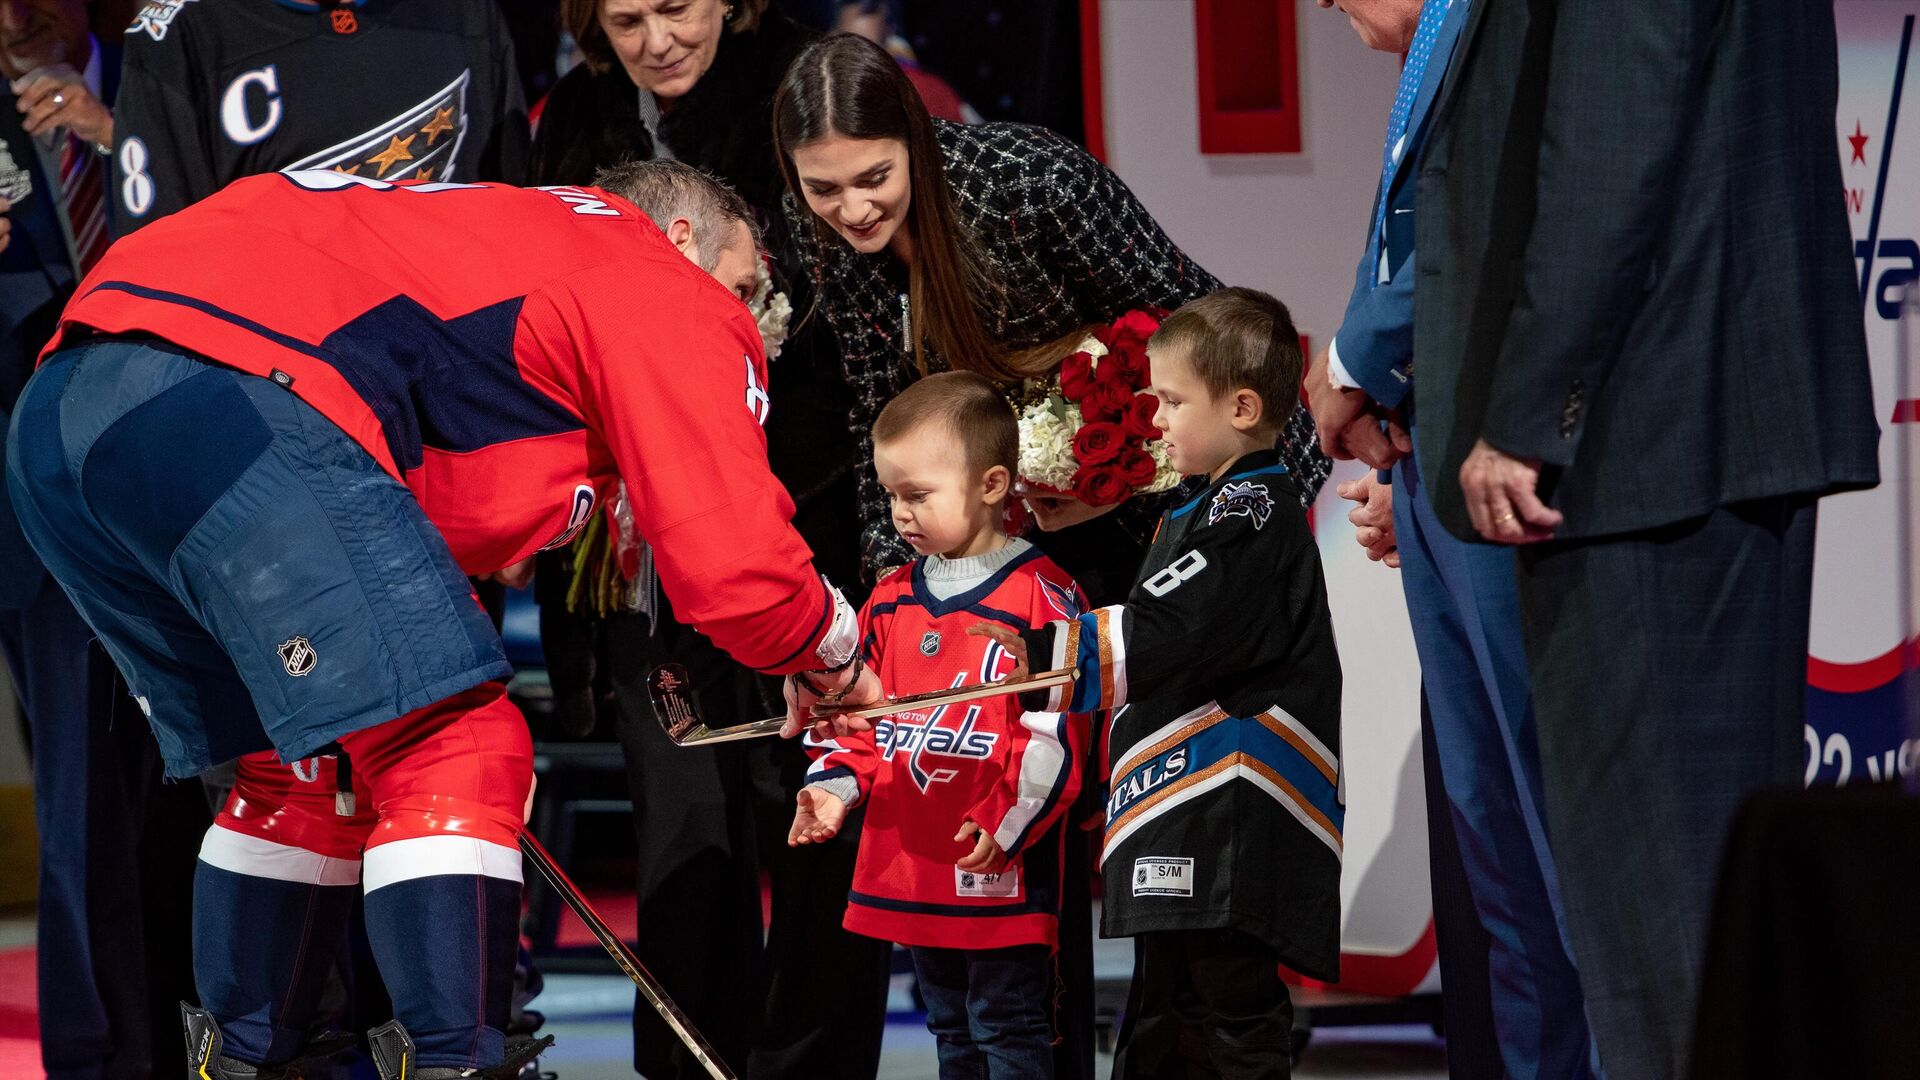 Ovechkin’s son received a trading card for participation in the NHL All-Star Game